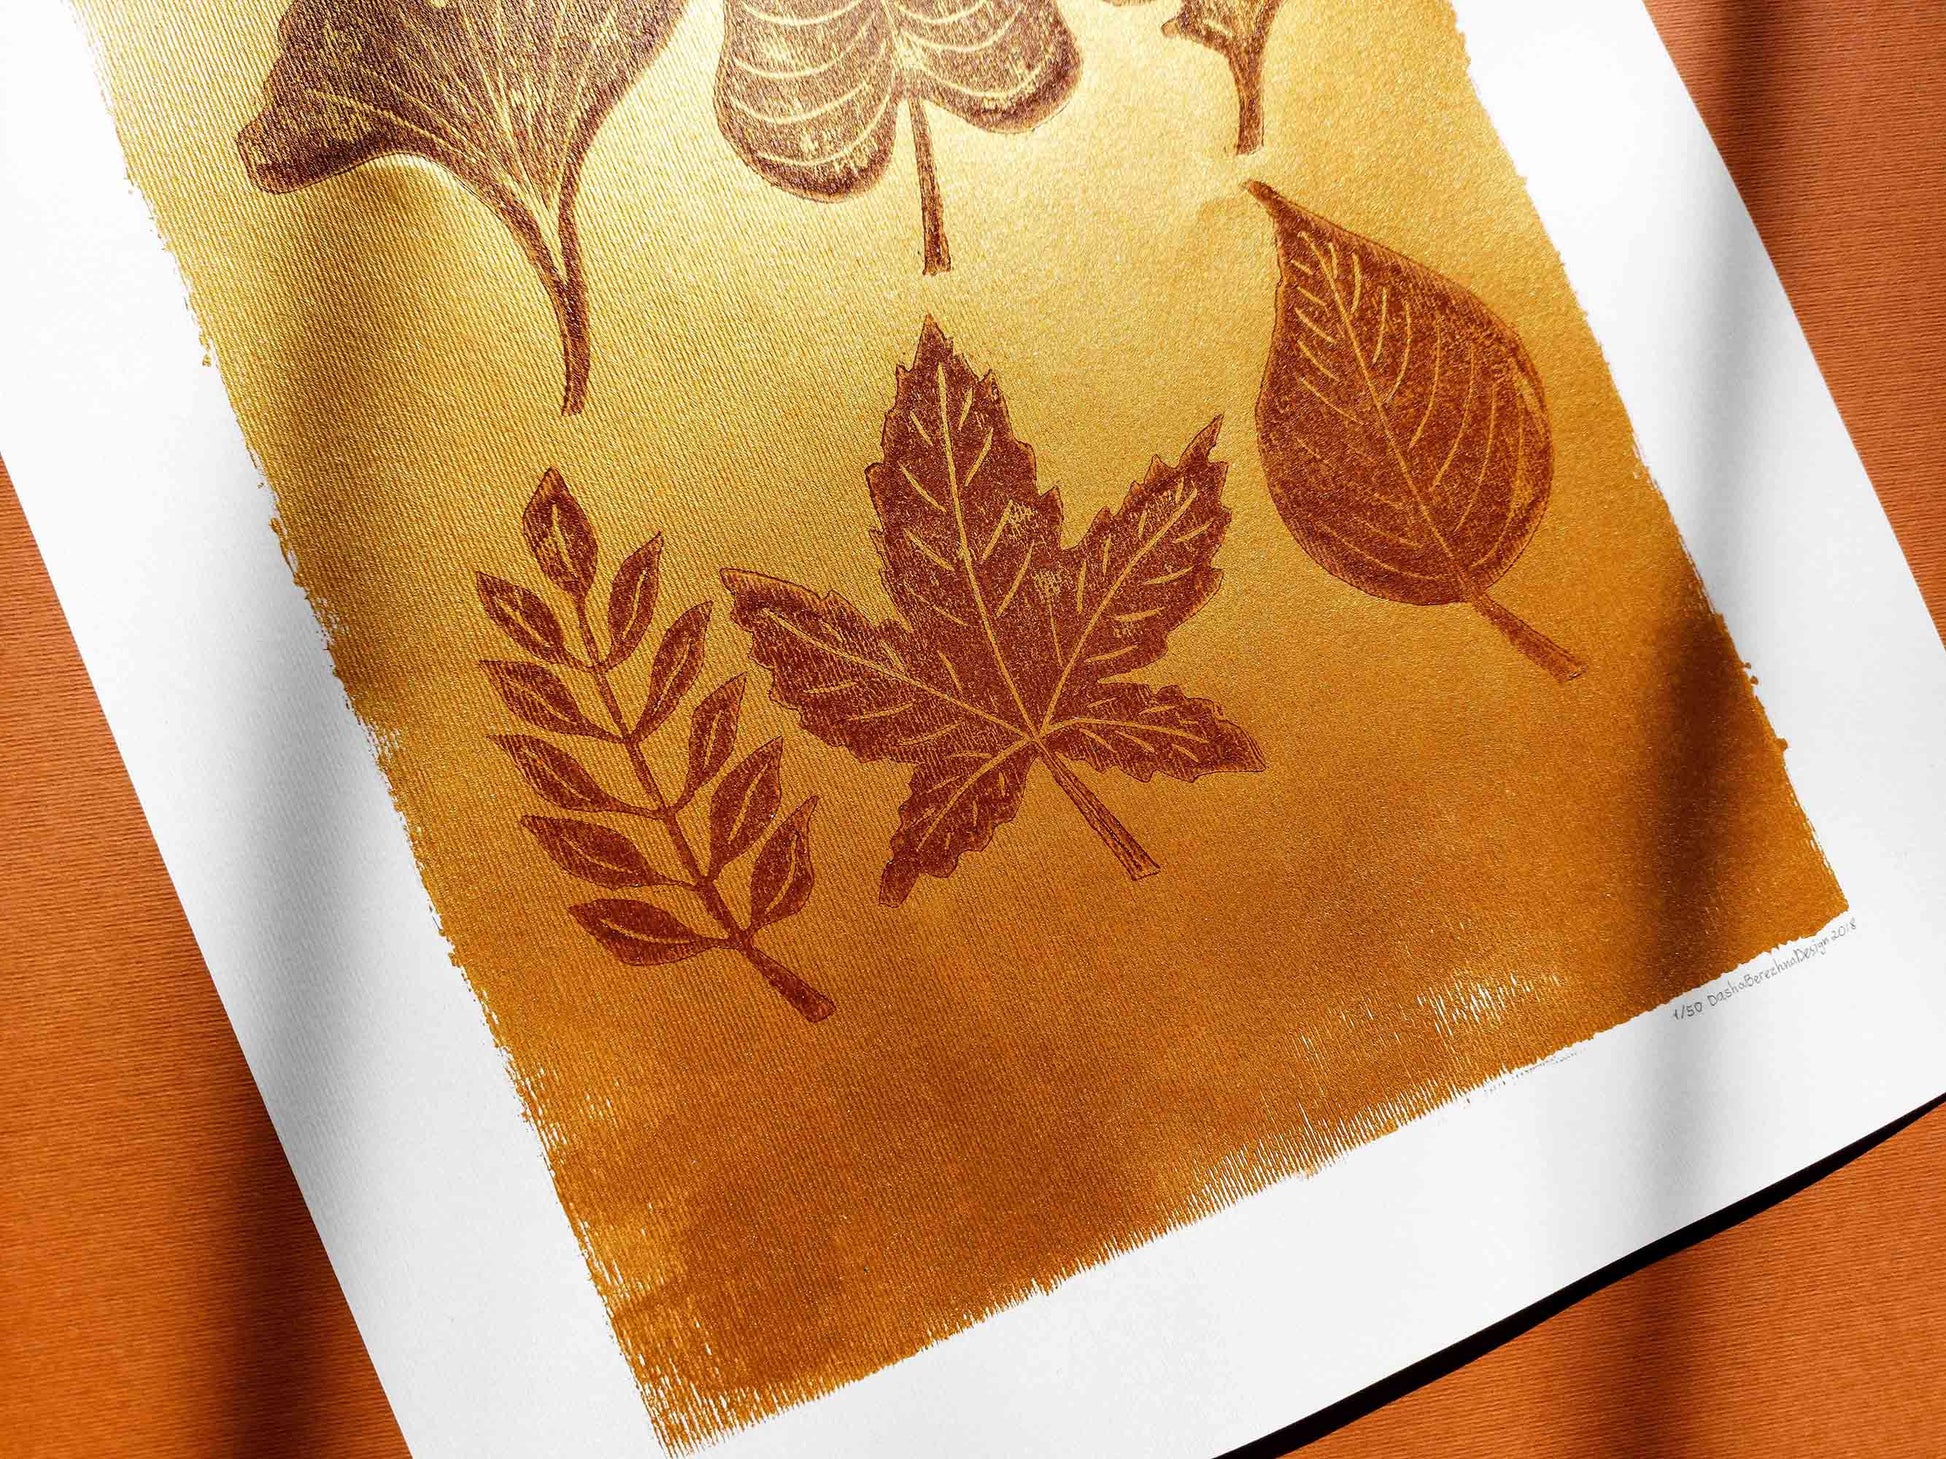 Gold and brown fall leaves Linocut print 12x16in for New home gift UNFRAMED / gold acrylic ink, oil ink, lino print, linogravure, autumn wall art, printmaking, handmade art, Nature lover gift, simple artwork, original artwork, houswarming gift, living room, bedroom, modern kitchen decor